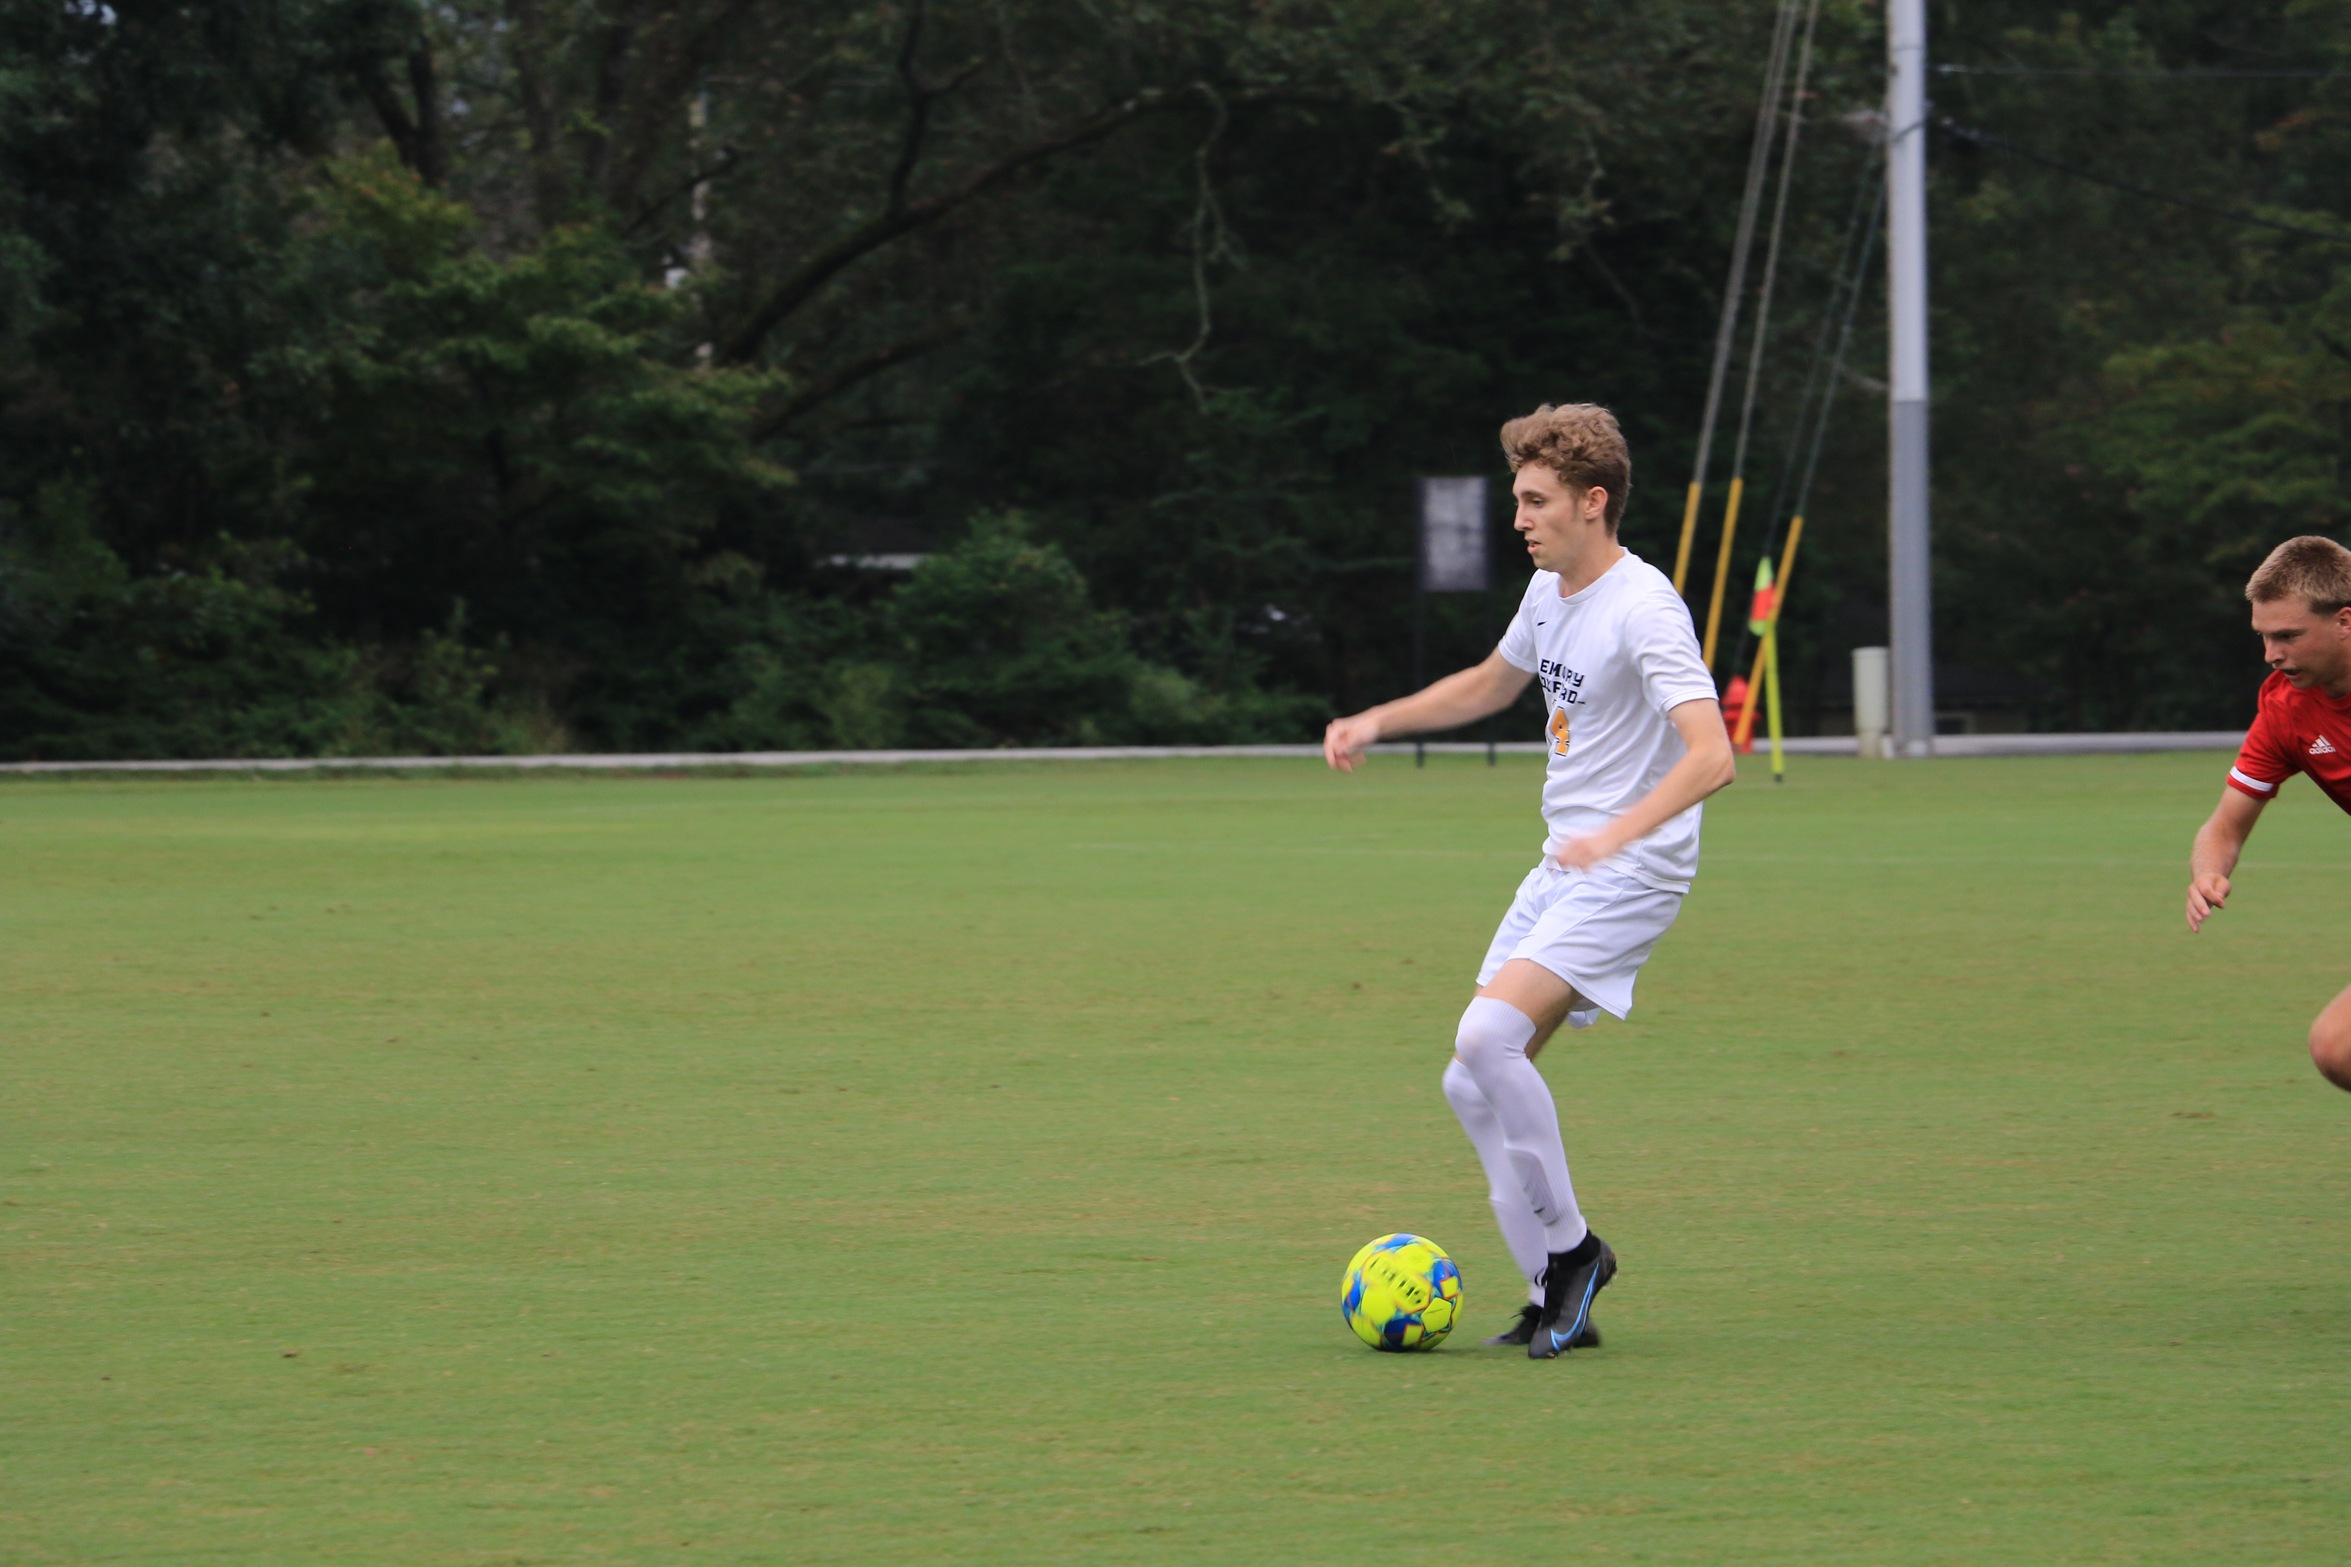 Men's soccer shut out by Copiah-Lincoln Community College